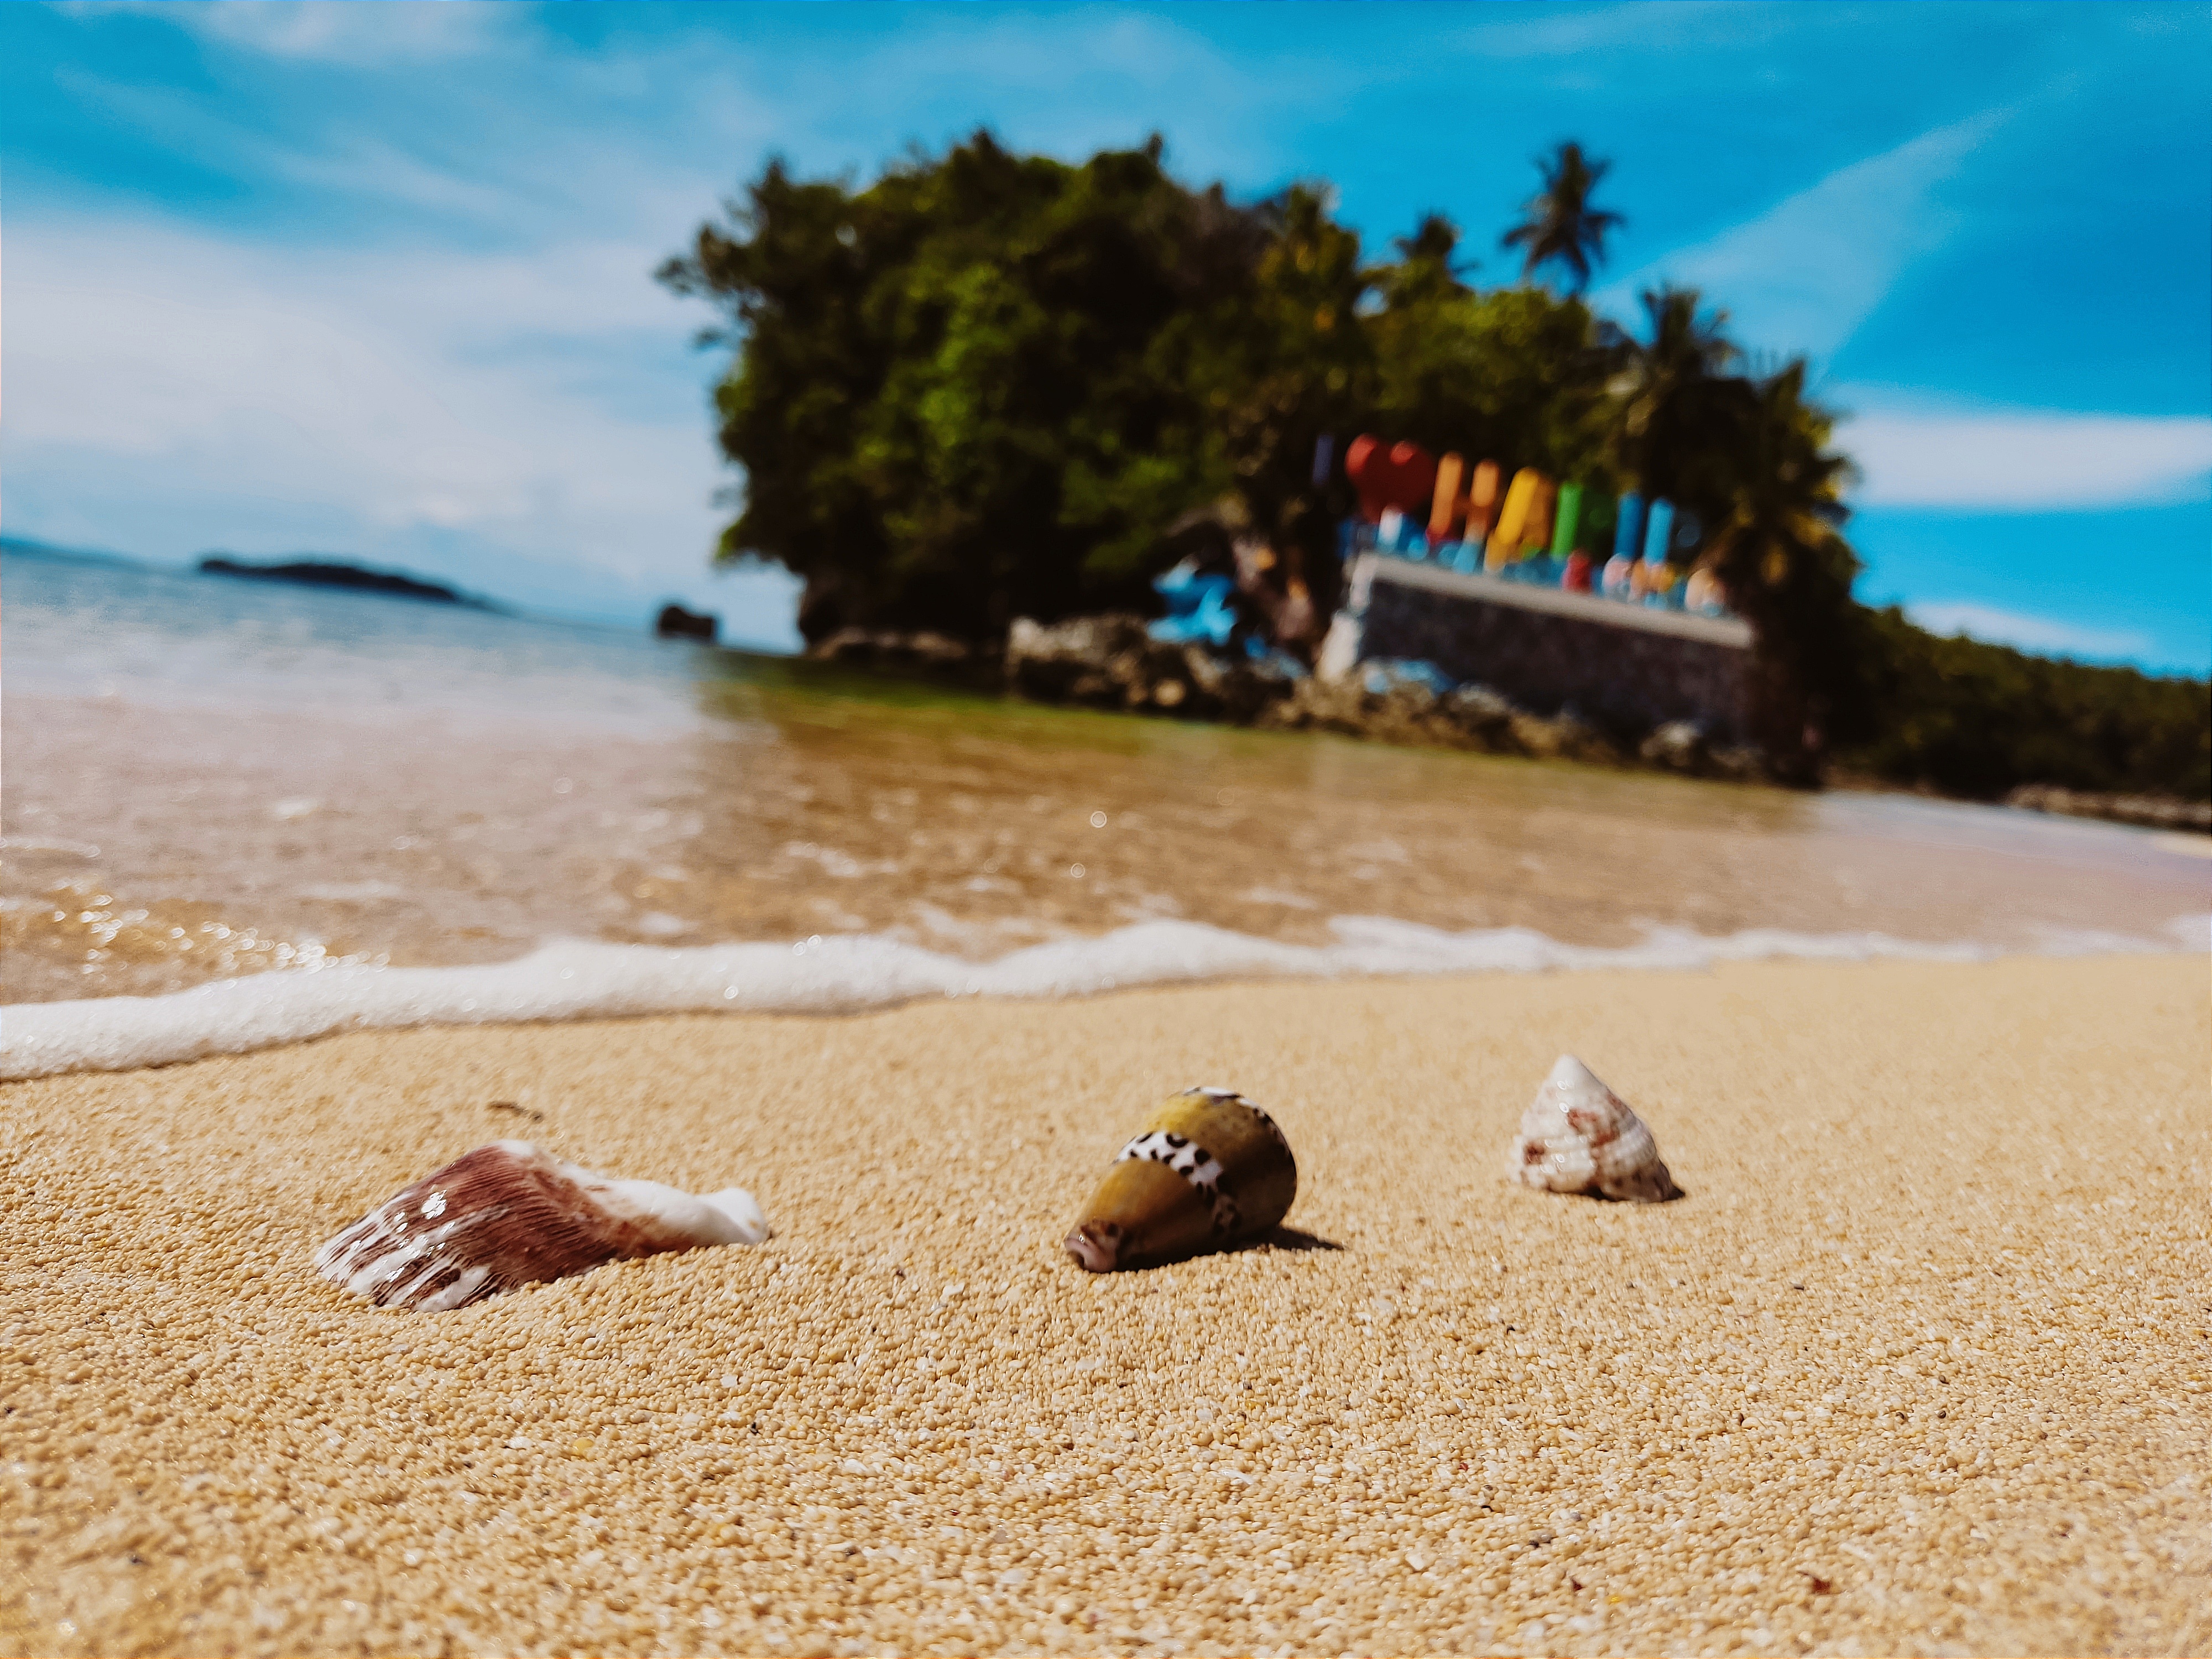 <b class="font-bara"><i class="bi bi-geo-fill h4"></i> HARIP OCEANSIDE BEACH</b> <br/>Its rustic Boracay-like charm offers powdery white sand, gleaming clear waters and majestic waves with very big potential to become a surfing destination.